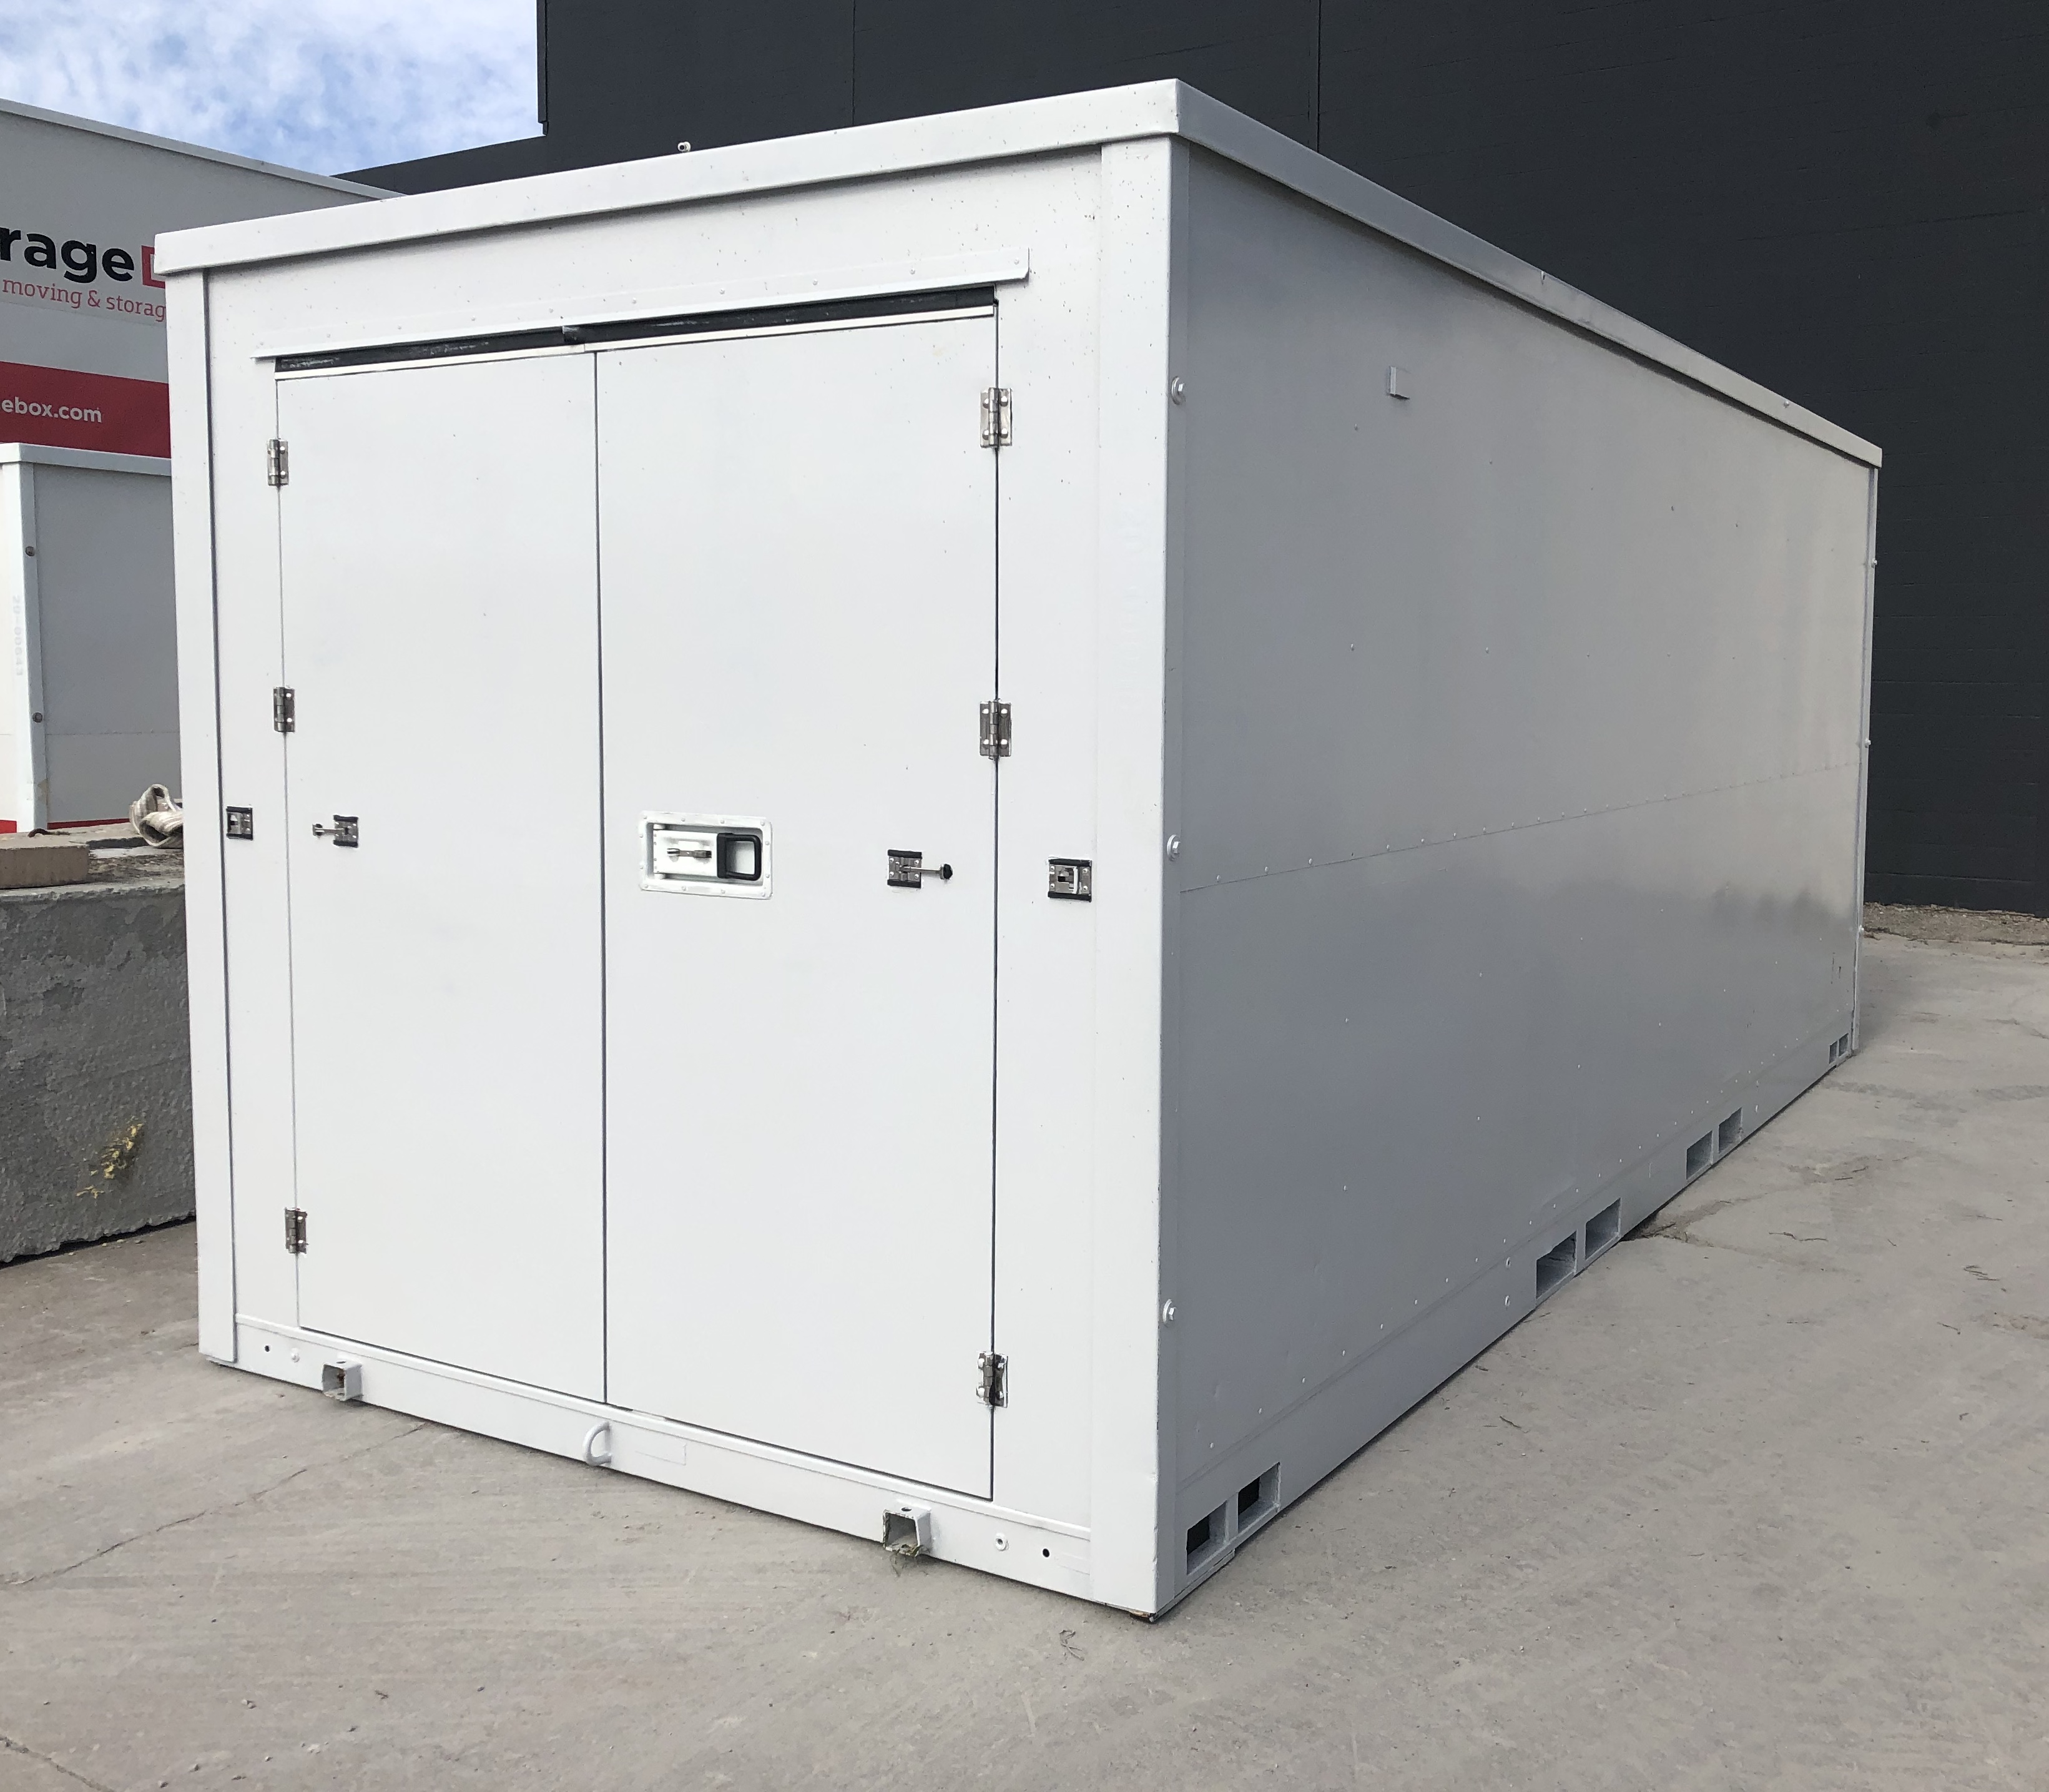 Top 4 Benefits of Portable Storage Units for Businesses - BigSteelBox